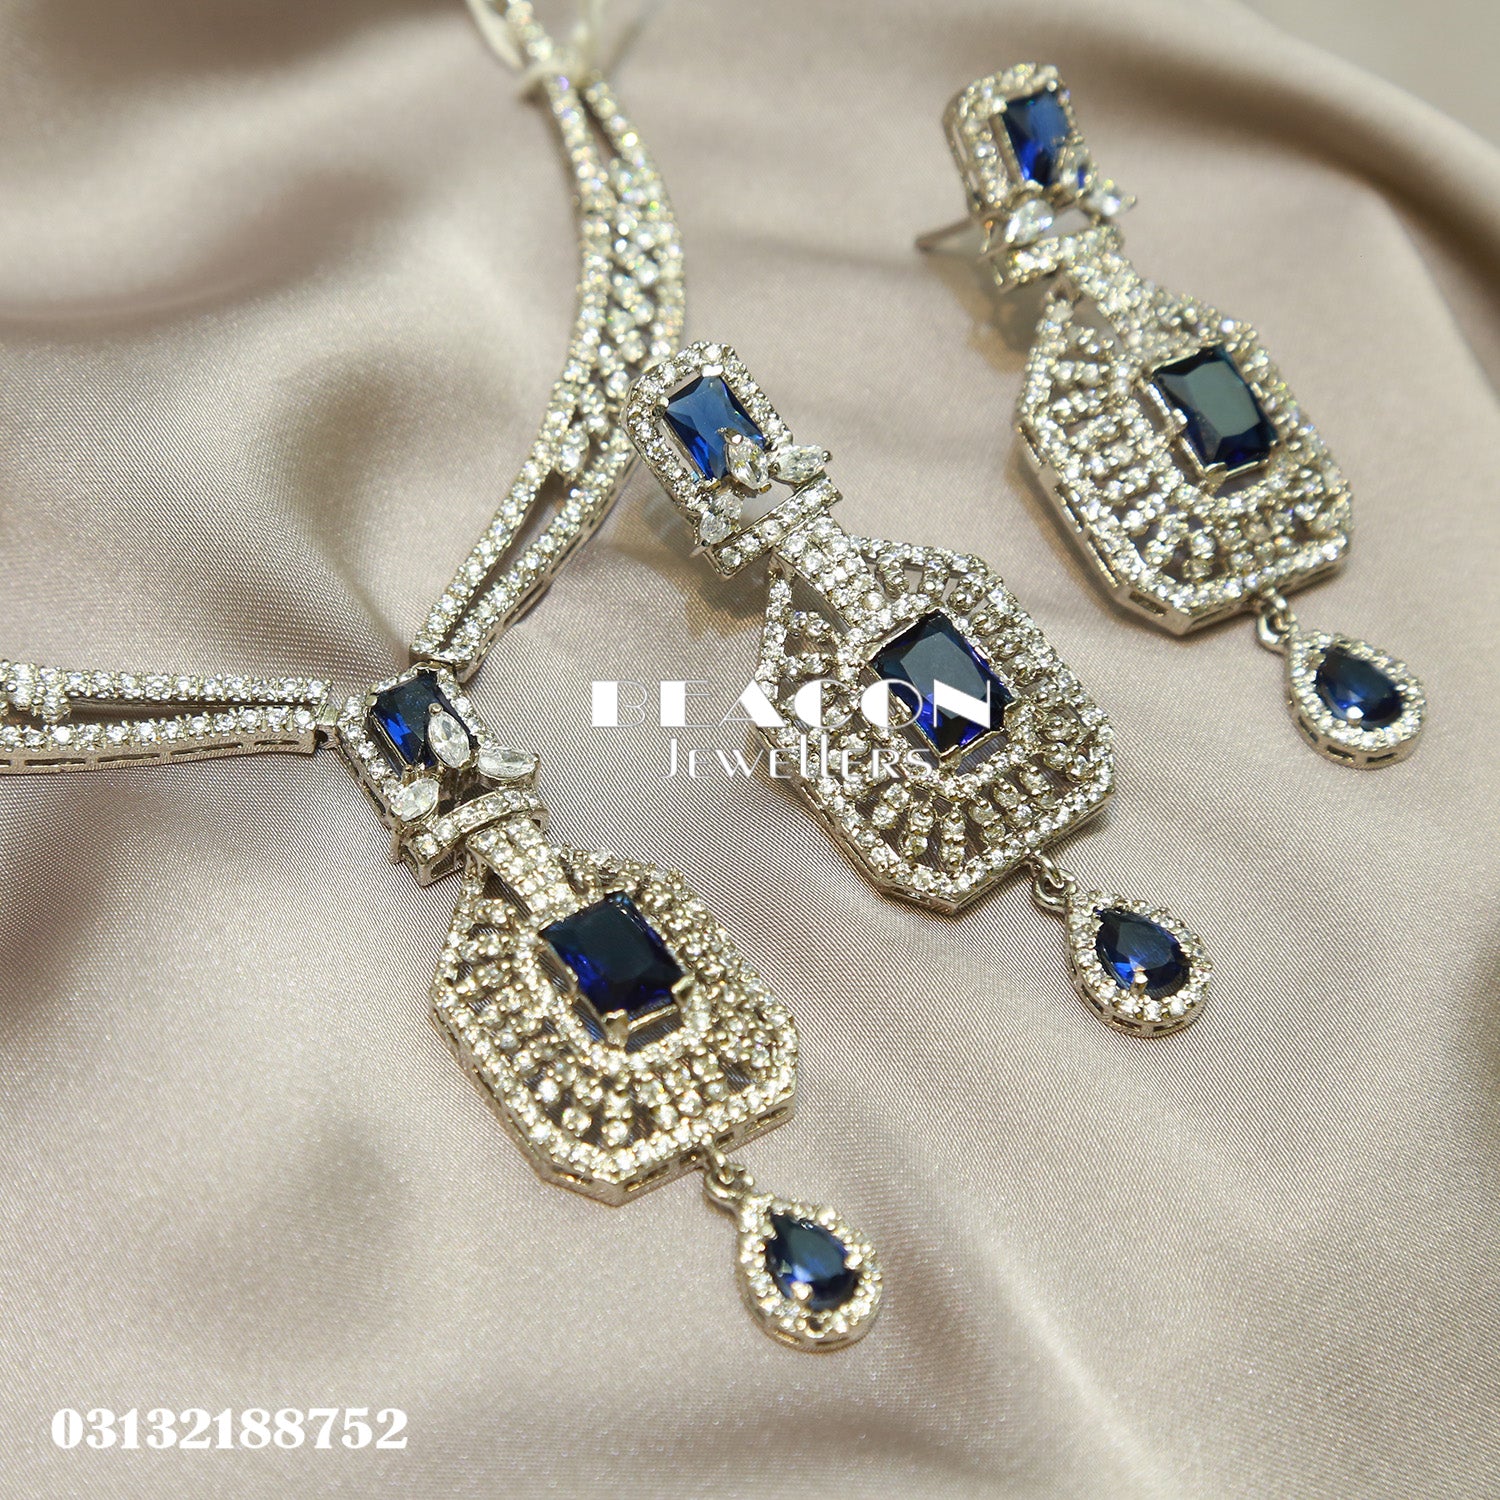 Necklace and Earrings 76